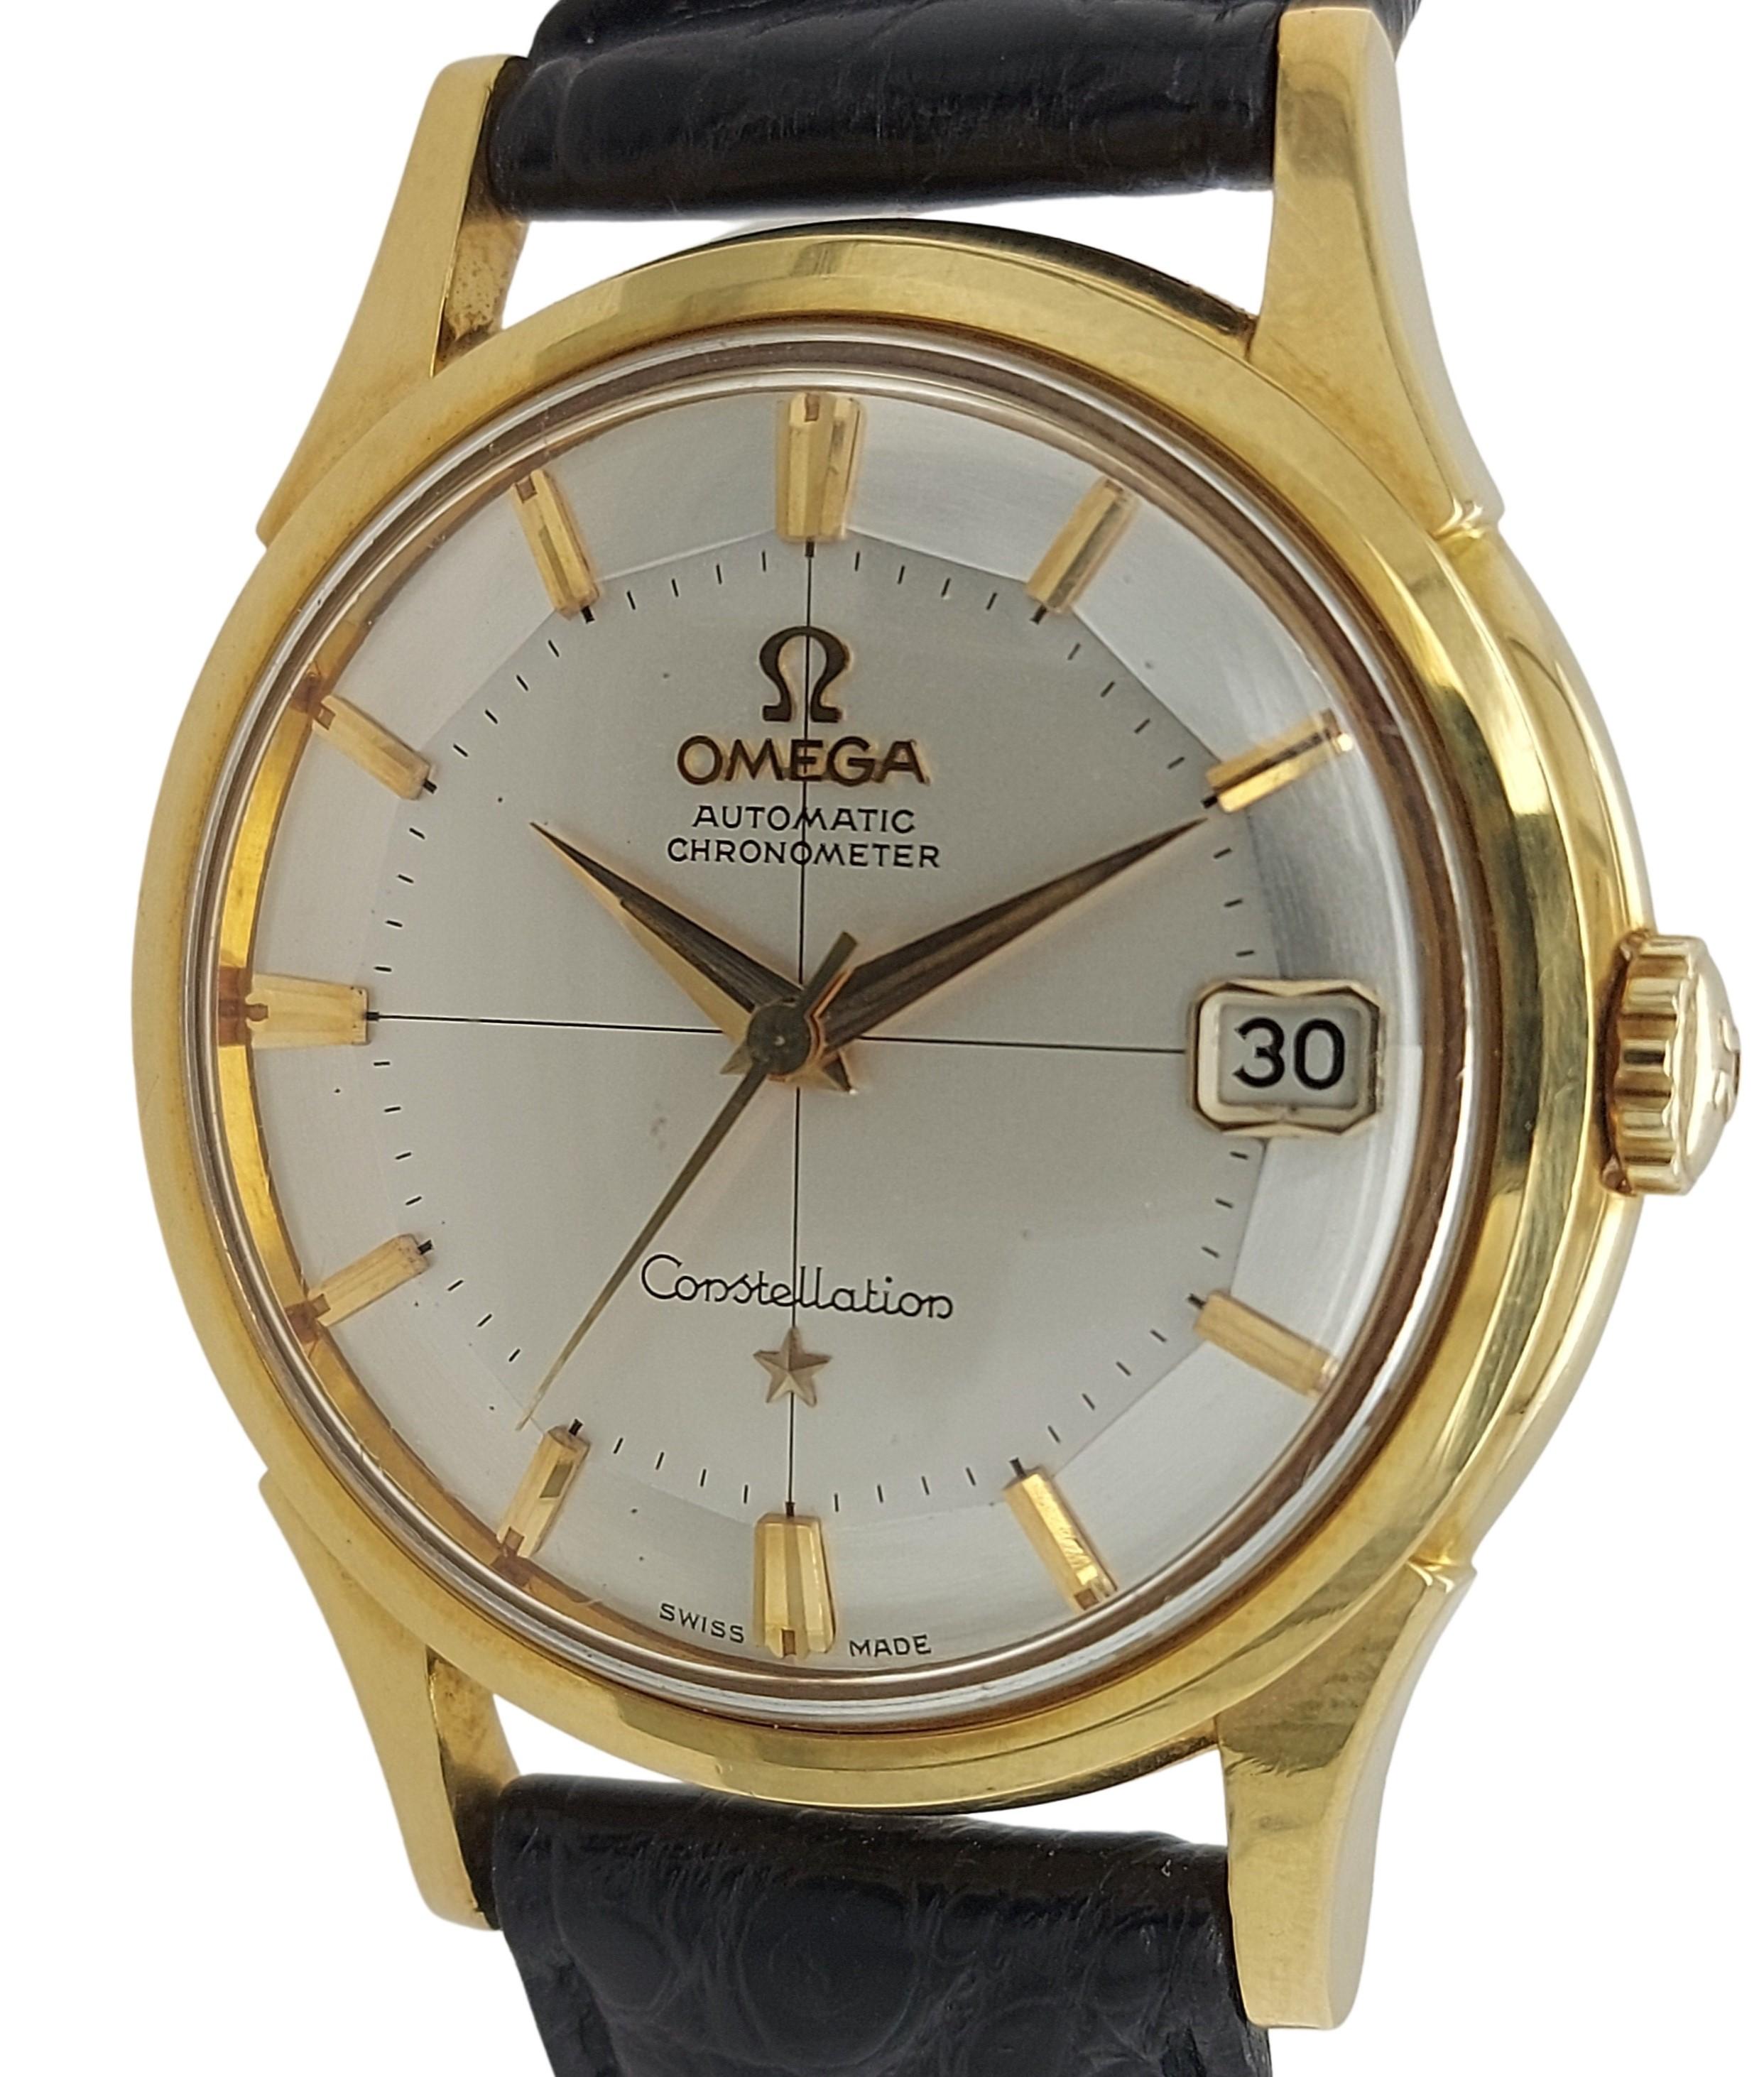 Collectible item 18kt Yellow Gold Omega Constellation Chronometer, Pie Pan Dial Wristwatch 14393/4 SC

Movement: Automatic, self winding movement, Cal 561

Functions: Hours, minutes, sweep seconds, date window at 3 position

Case: 18kt solid gold